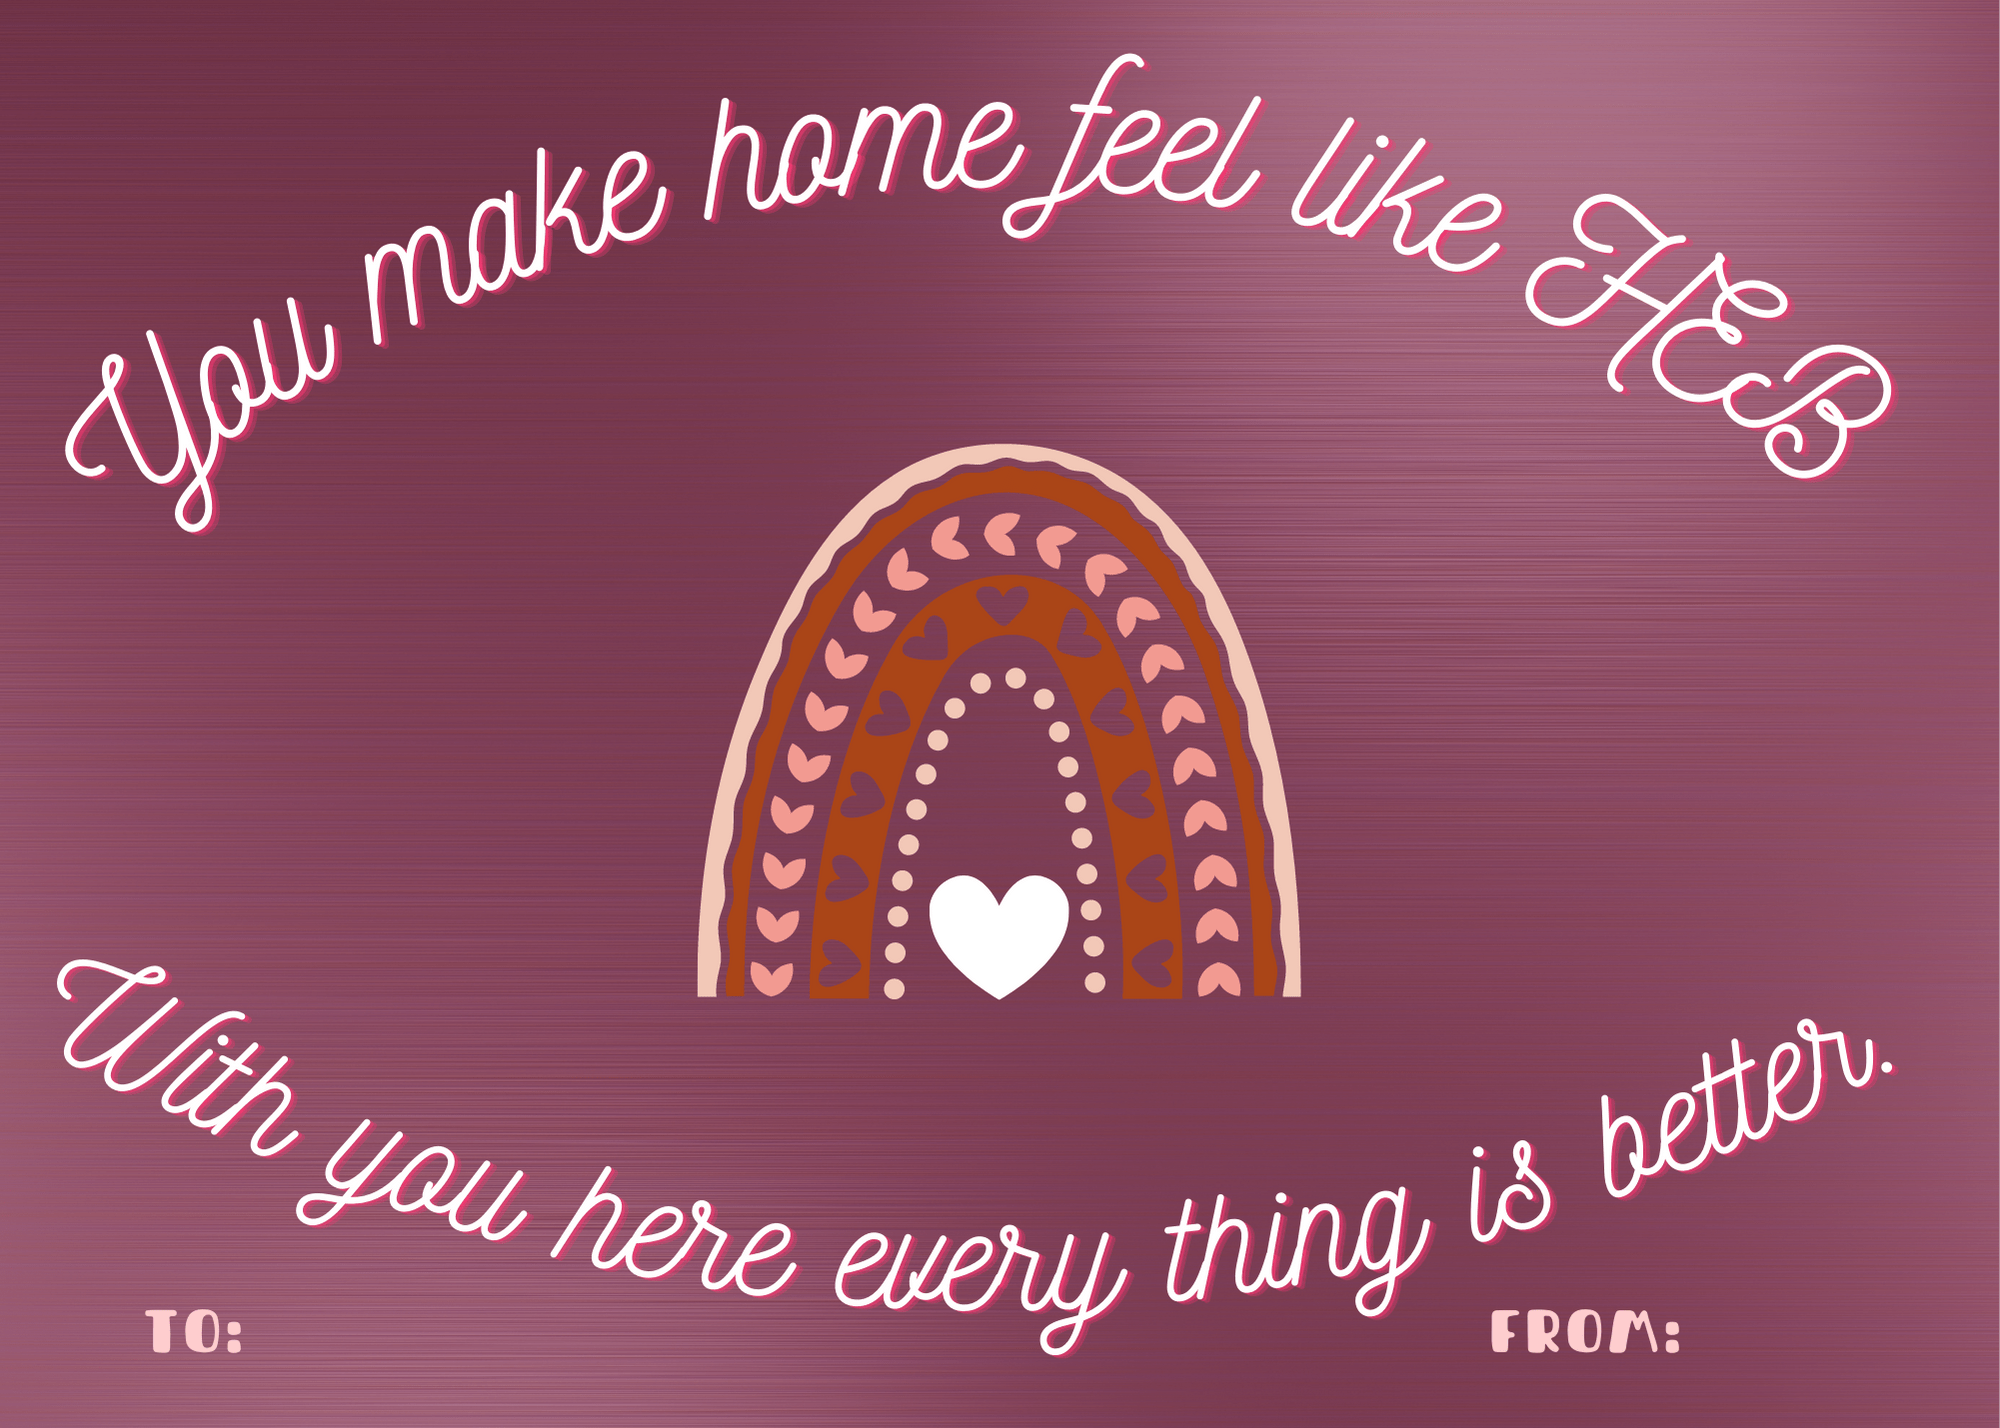 Punny Valentine Card - reads "You make home feel like HEB - with you here, everything is better."